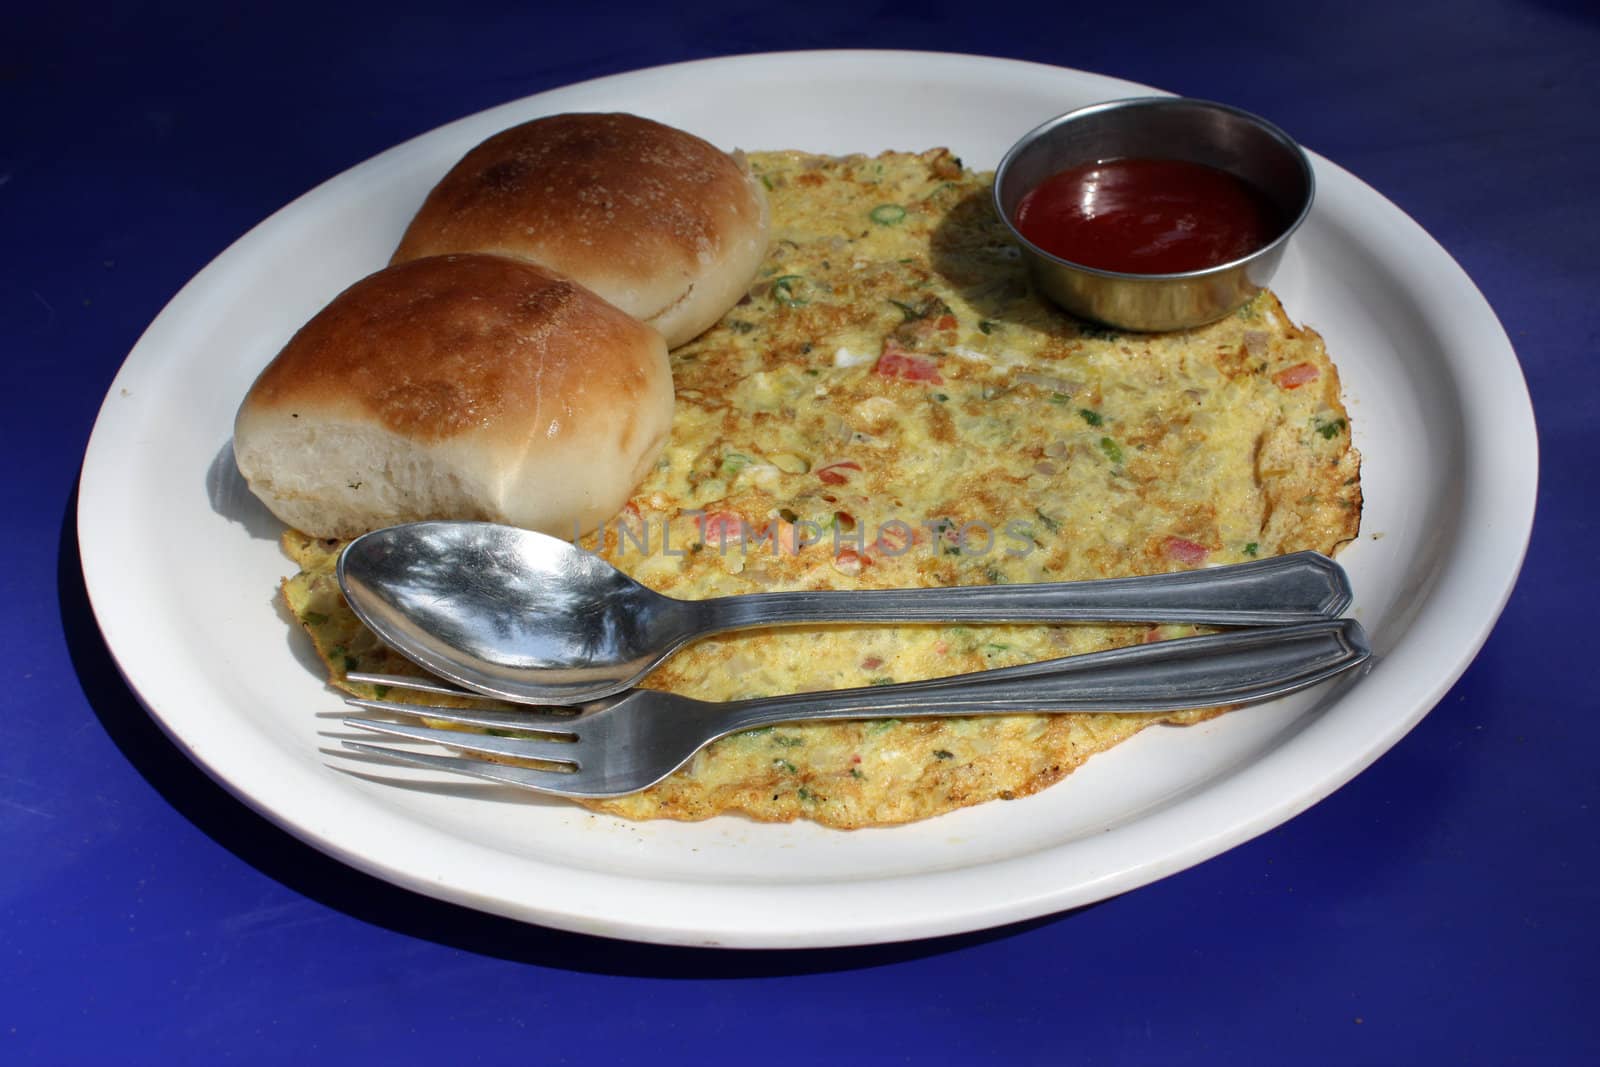 A plate of breakfast containing egg omelette, bread & sauce, in a restaurant on a blue table.